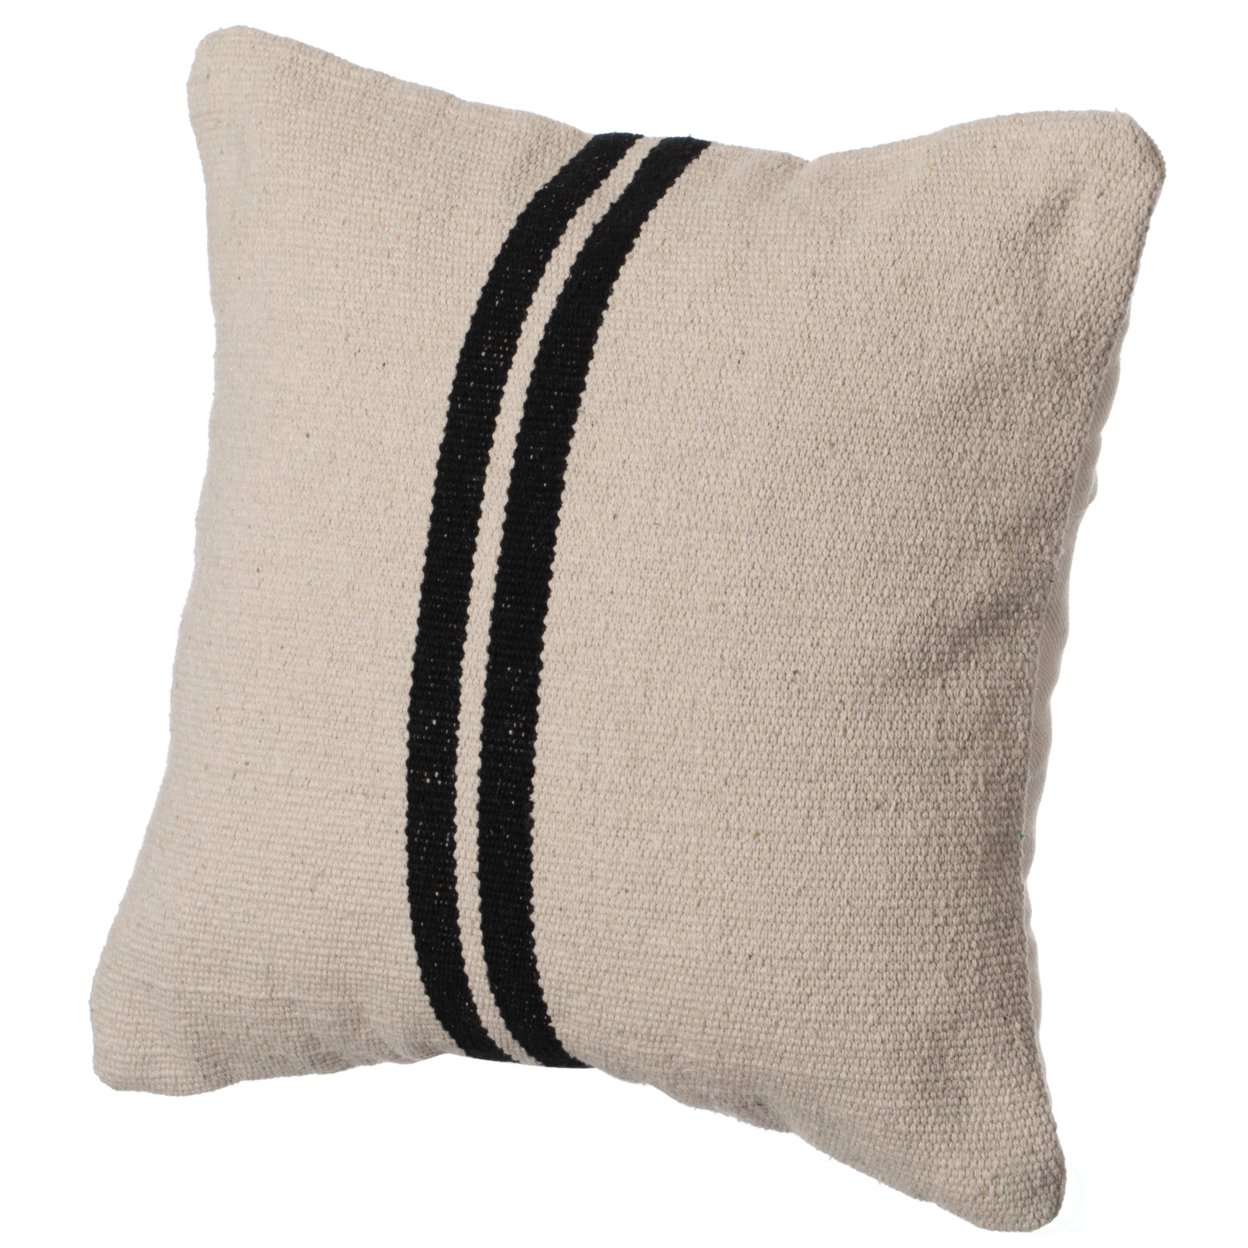 16 Handwoven Cotton Throw Pillow Cover Flat Natural Design - Fringed